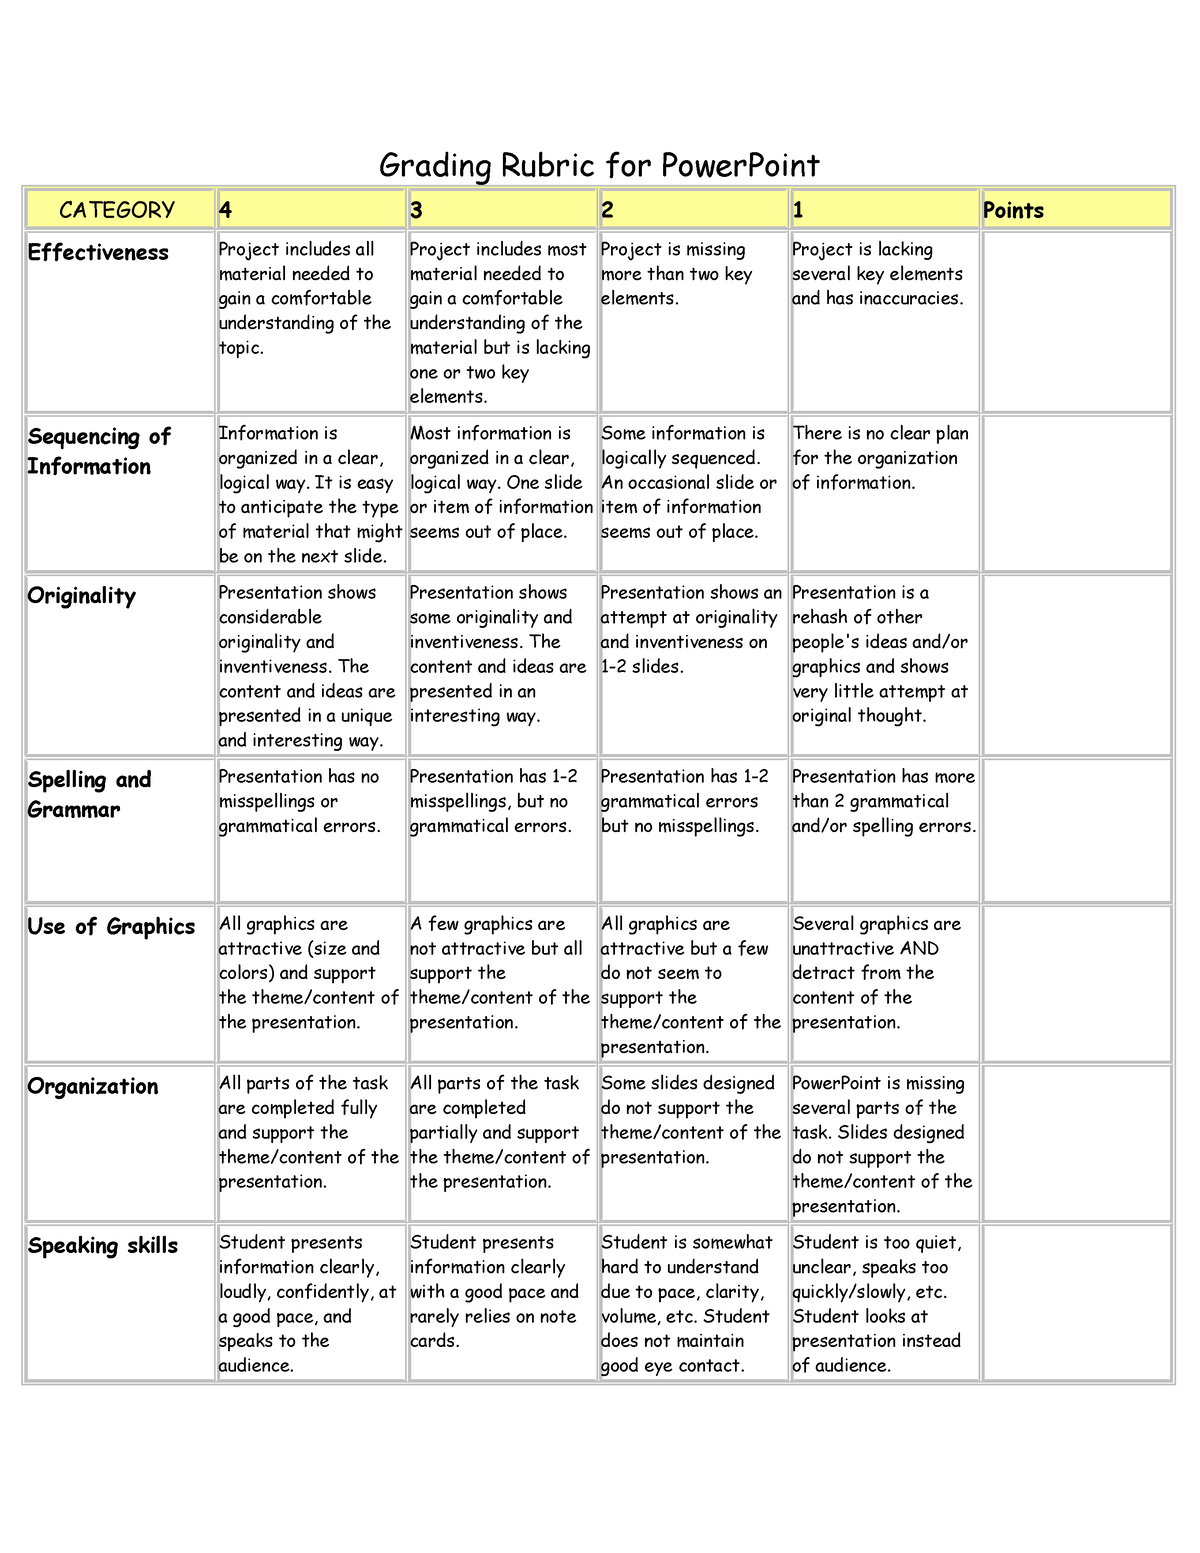 ppt-rubrics-grading-rubric-for-powerpoint-category-4-3-2-1-points